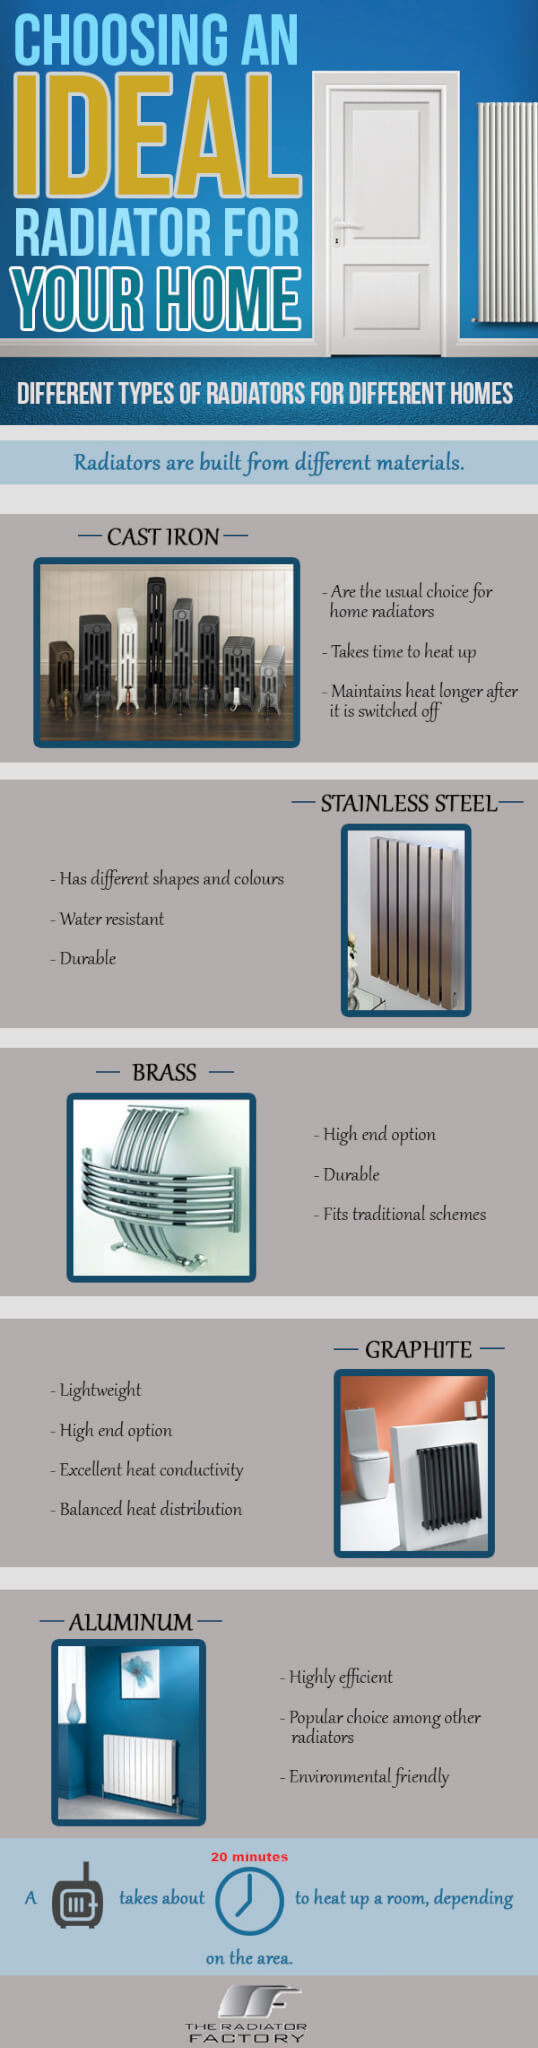 CHOOSING AN IDEAL RADIATOR FOR YOUR HOME